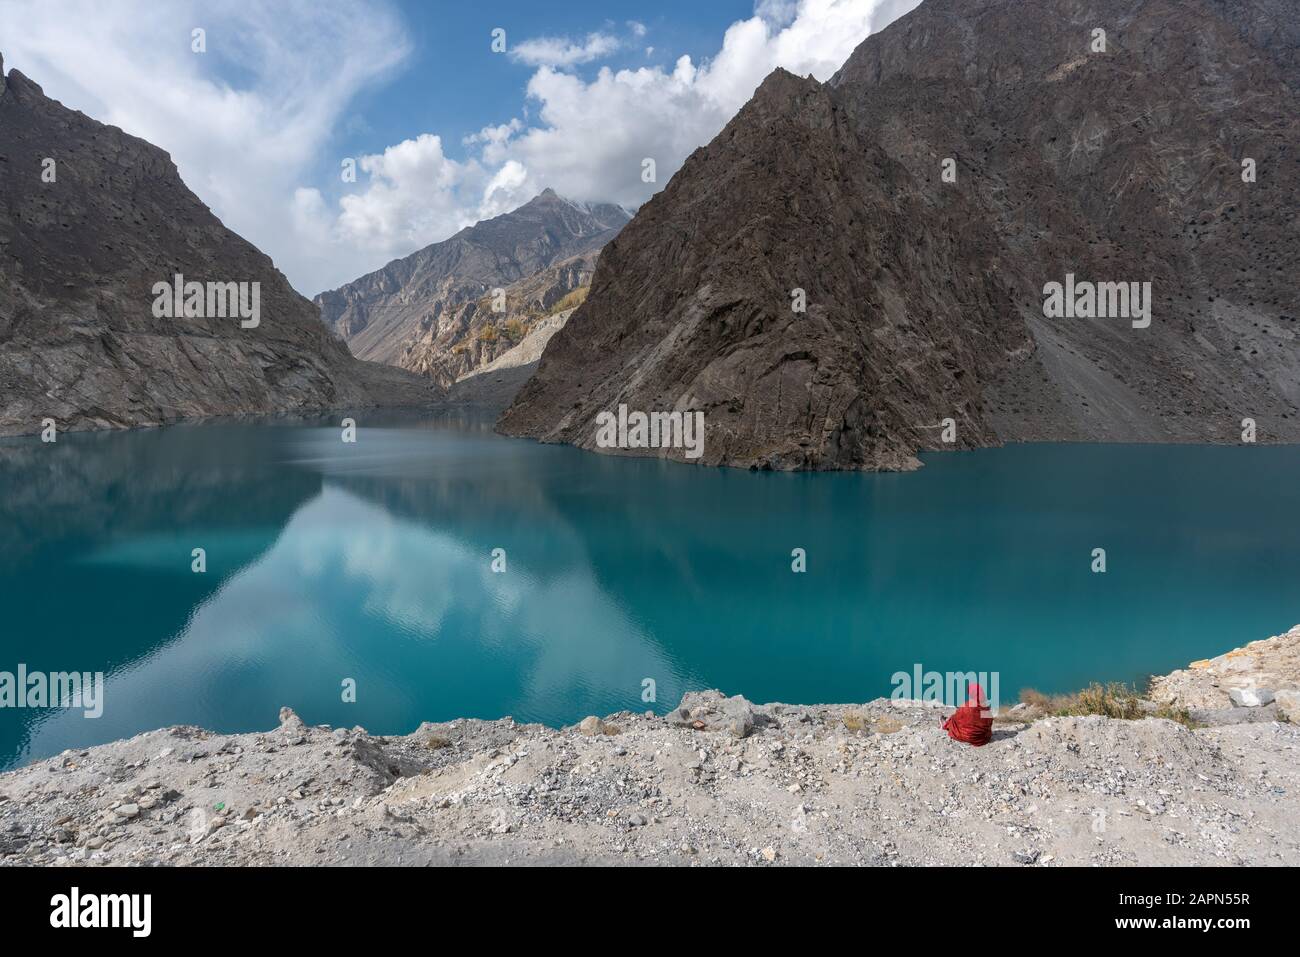 Pakistani woman in red hijab sitting on rocks by turquoise water of Attabad Lake in Gilgit Baltistan, Pakistan Stock Photo